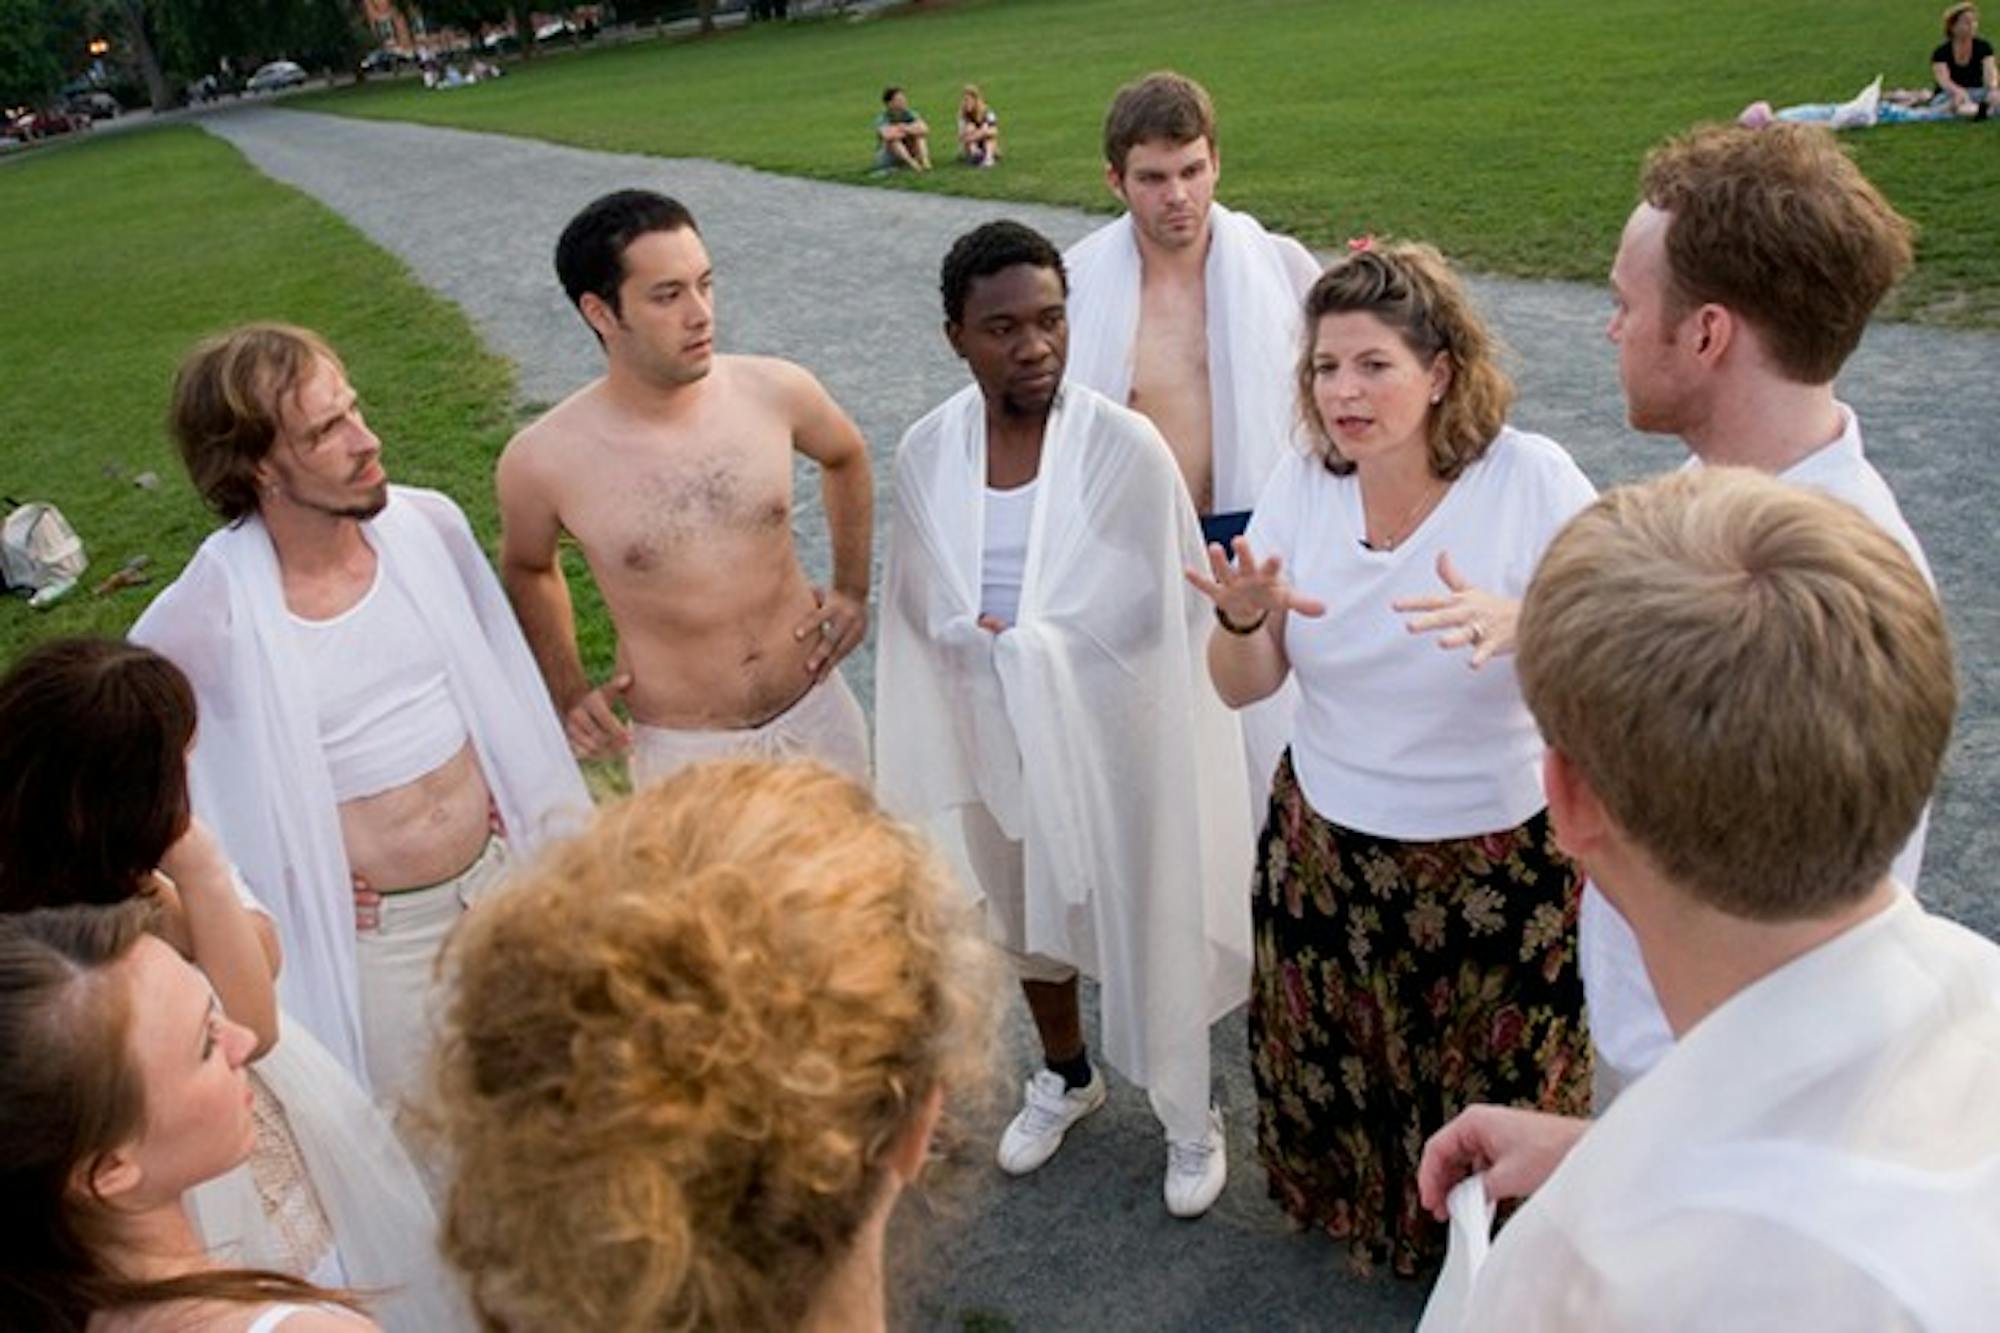 Northern Stage founder and artistic director Brooke Ciardelli talks to Dartmouth students and international actors during a dress rehearsal.